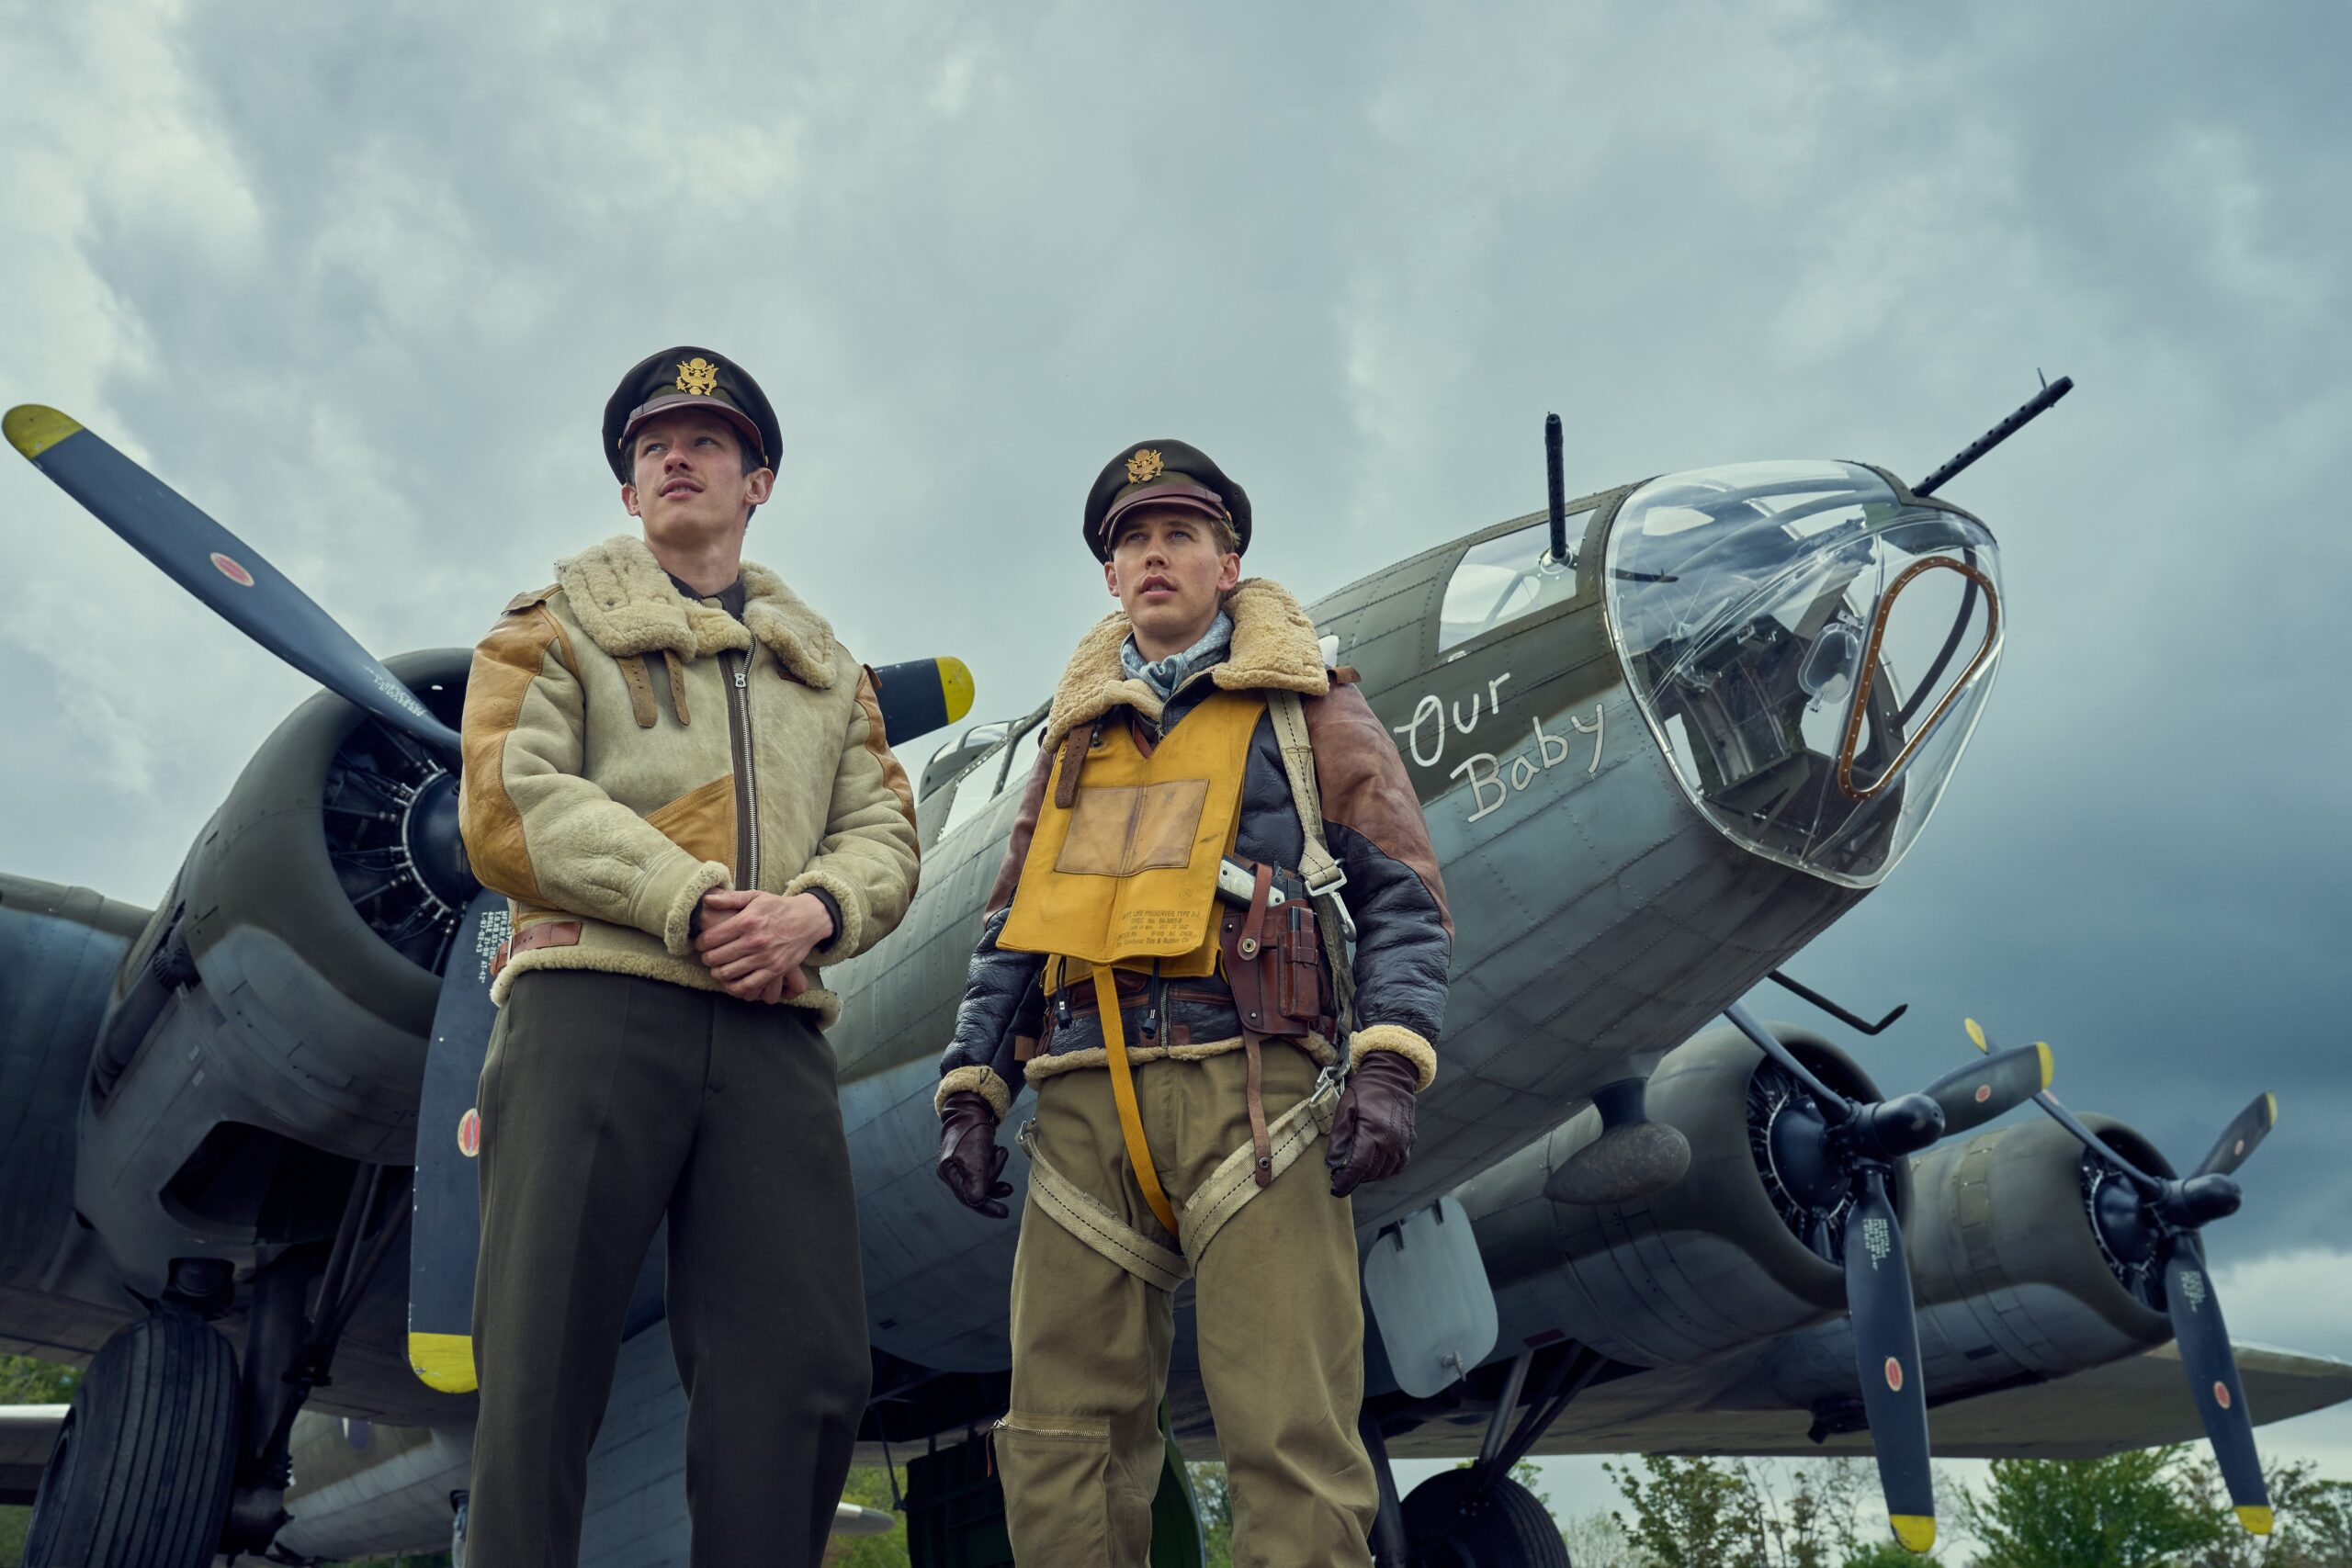 Episode 1. Callum Turner and Austin Butler in "Masters of the Air," premiering January 26, 2024 on Apple TV+.